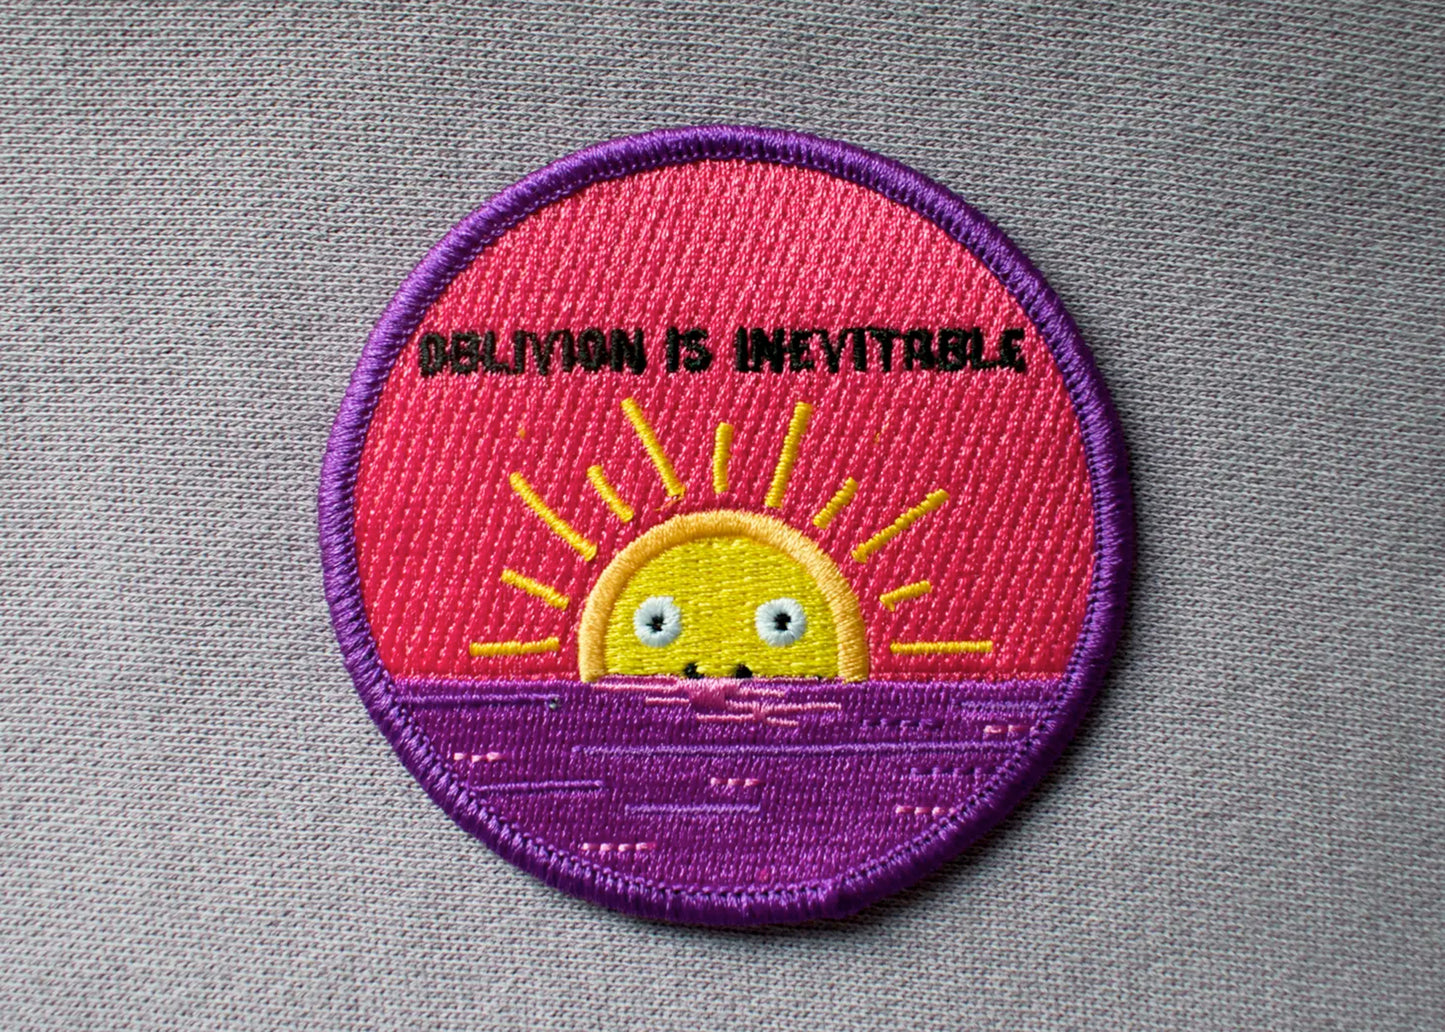 Oblivion Is Inevitable Patch